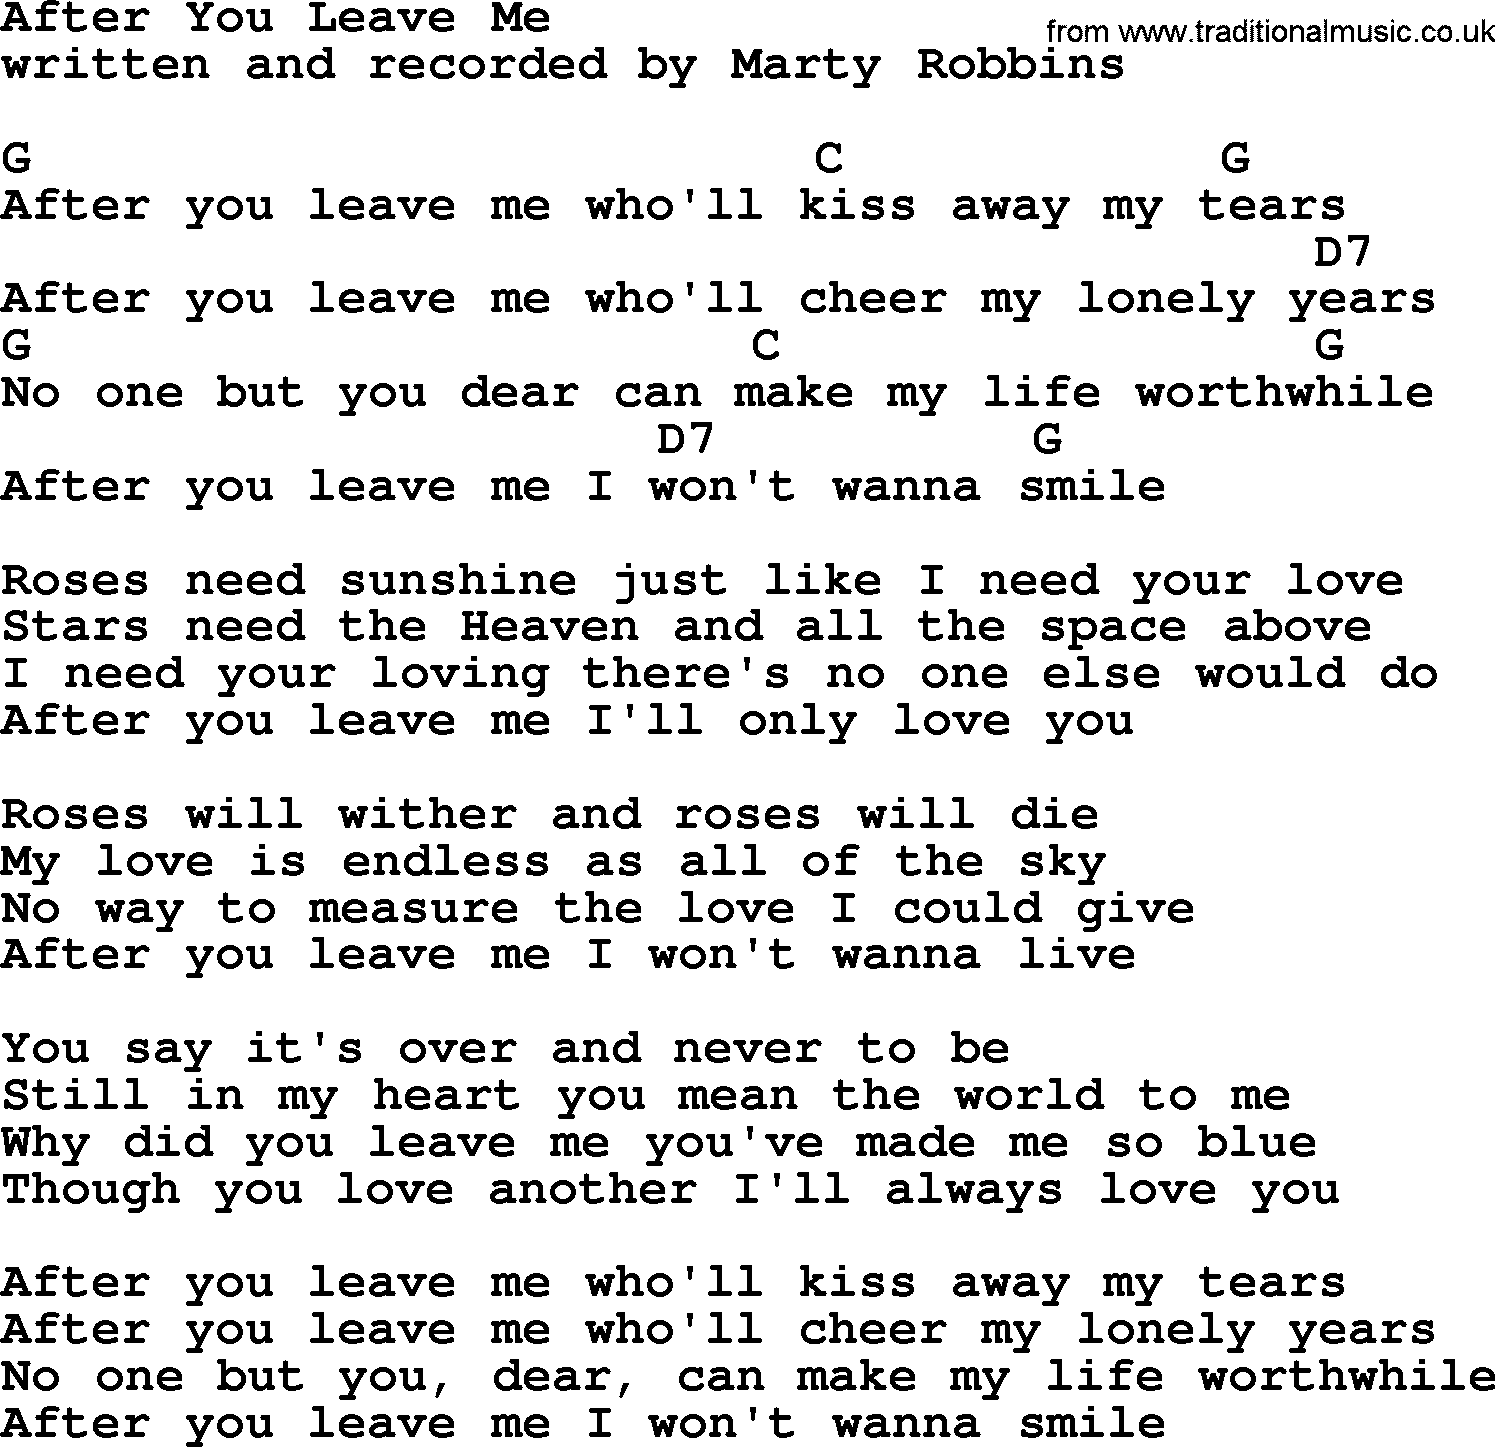 Marty Robbins song: After You Leave Me, lyrics and chords